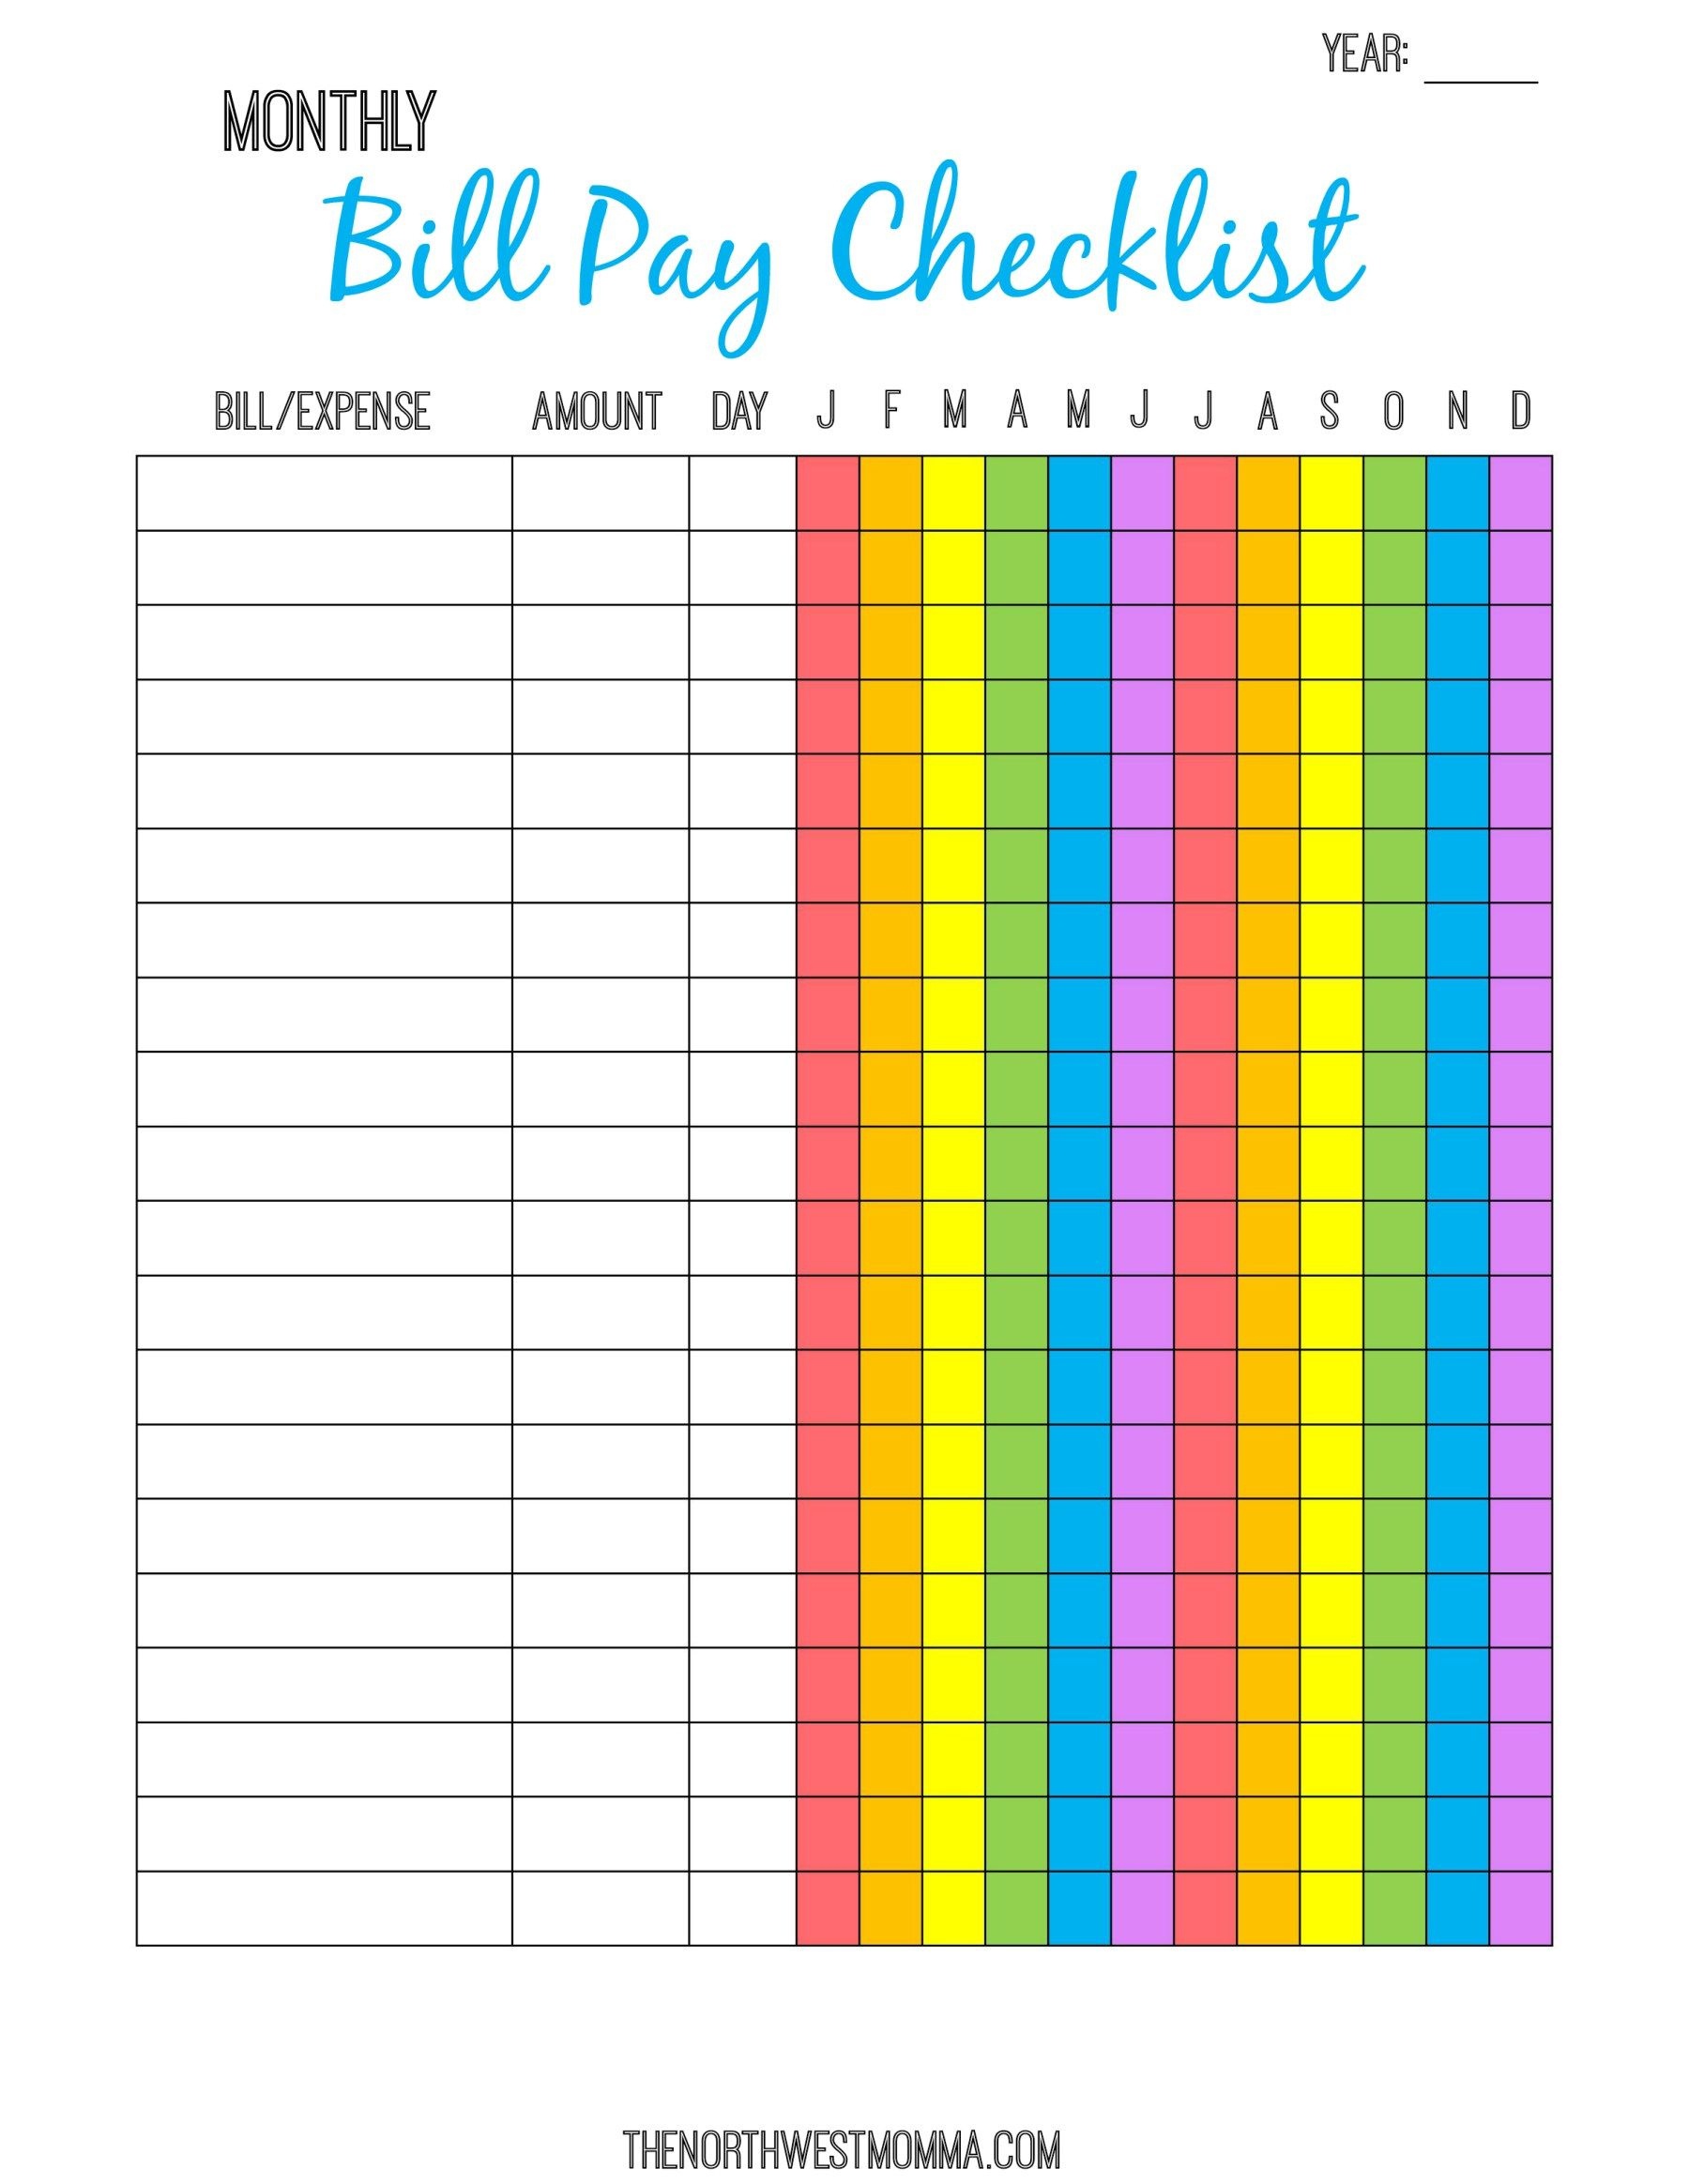 Monthly Bill Pay Checklist- Free Printable! | $ Saving Money - Free Printable Weekly Bill Organizer